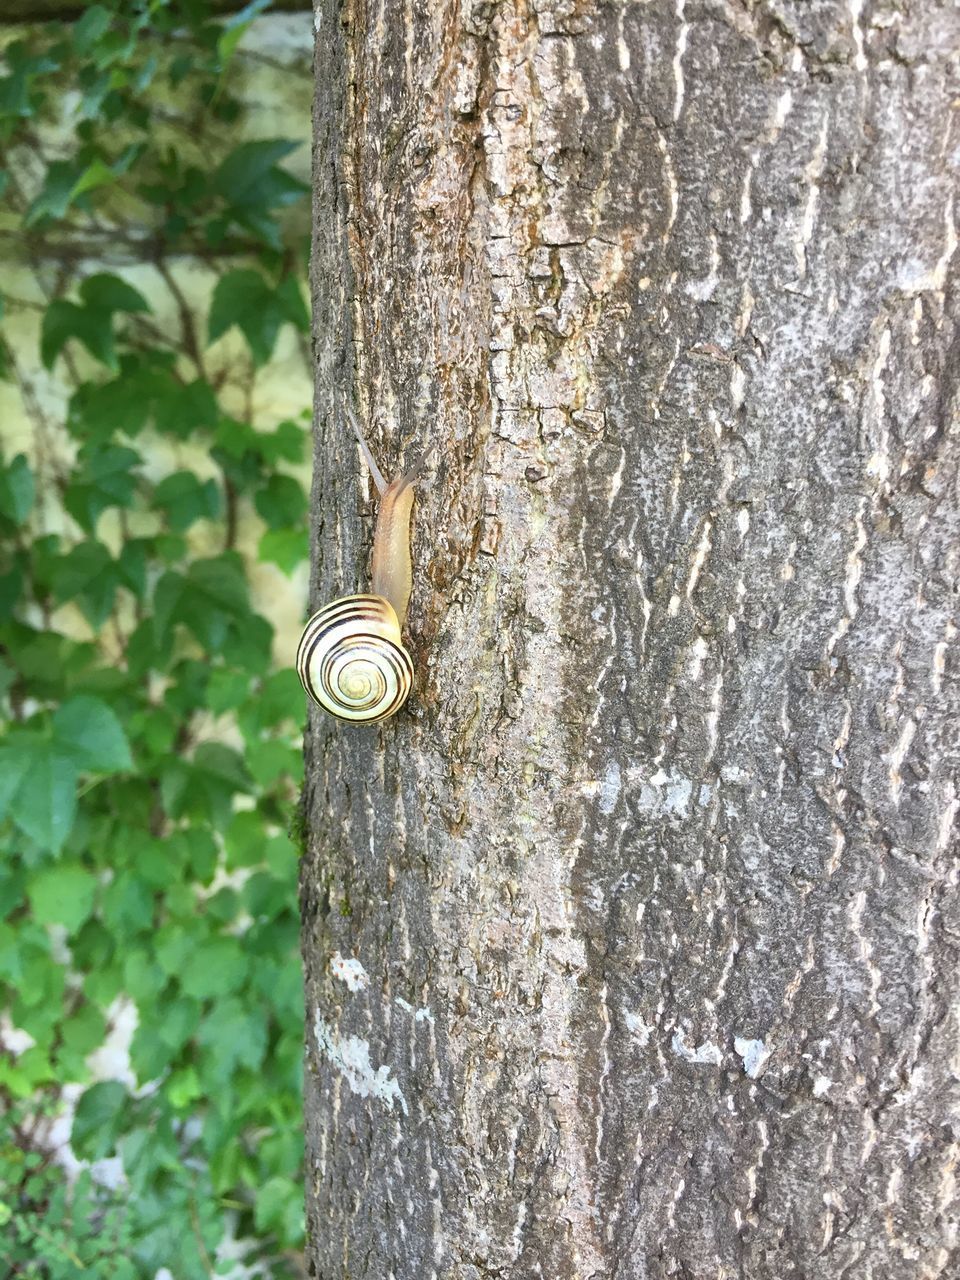 CLOSE-UP OF SNAIL ON TREE